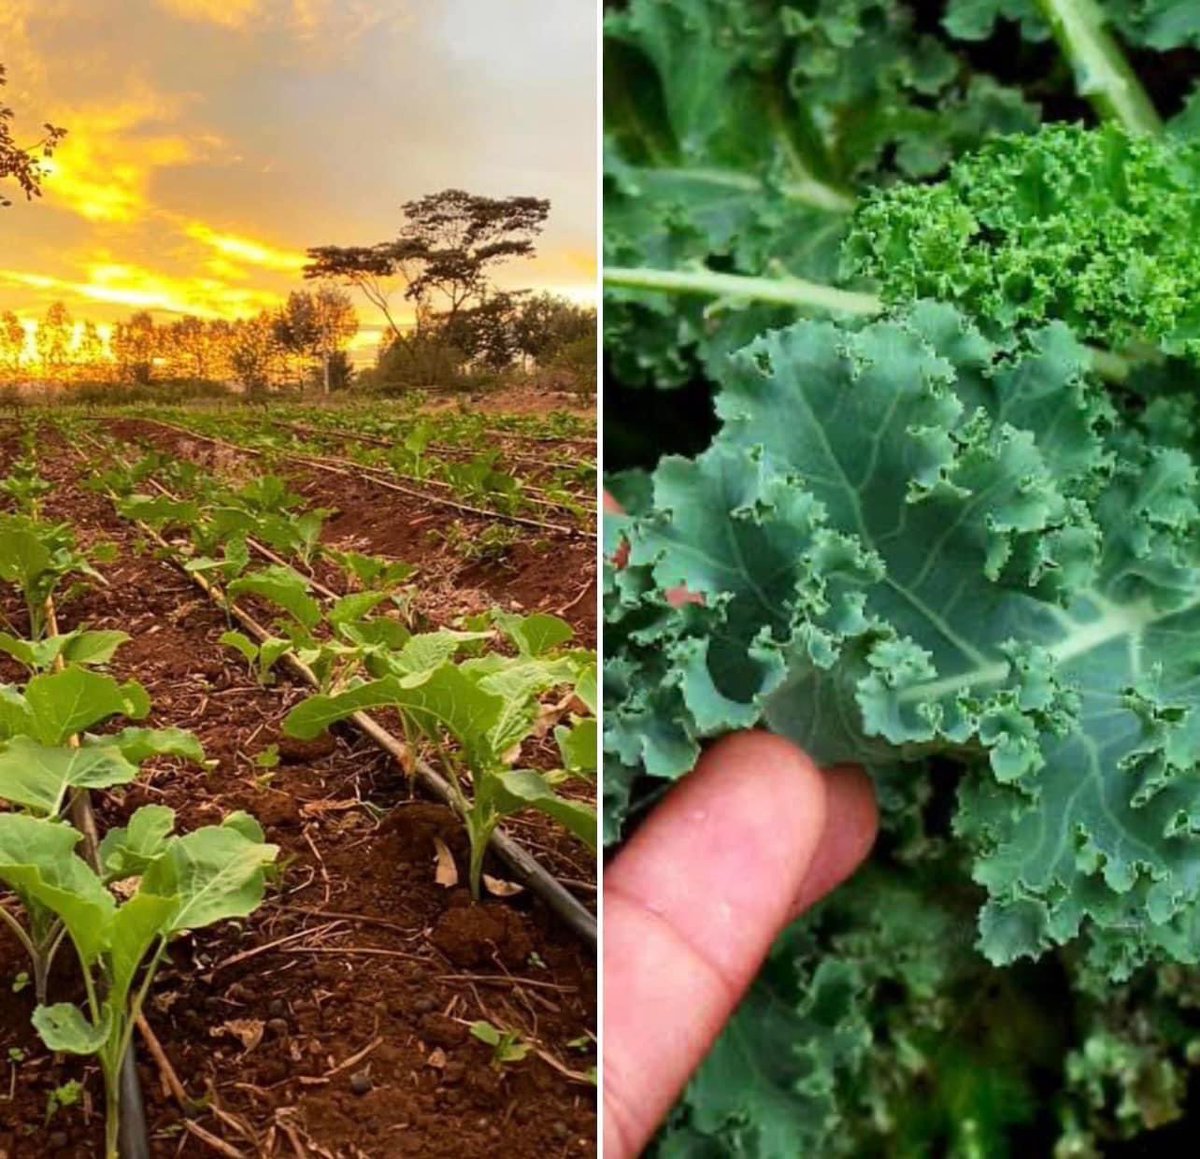 To most Kenyans, the first frame is Sukumawiki or Kales, but they’re actually called Collard 🥬 Kale is the one in the second frame, that’s commonly referred to as Sukumawiki Matumbo/ Malkia. However your greens identify as, plant them under drip irrigation from